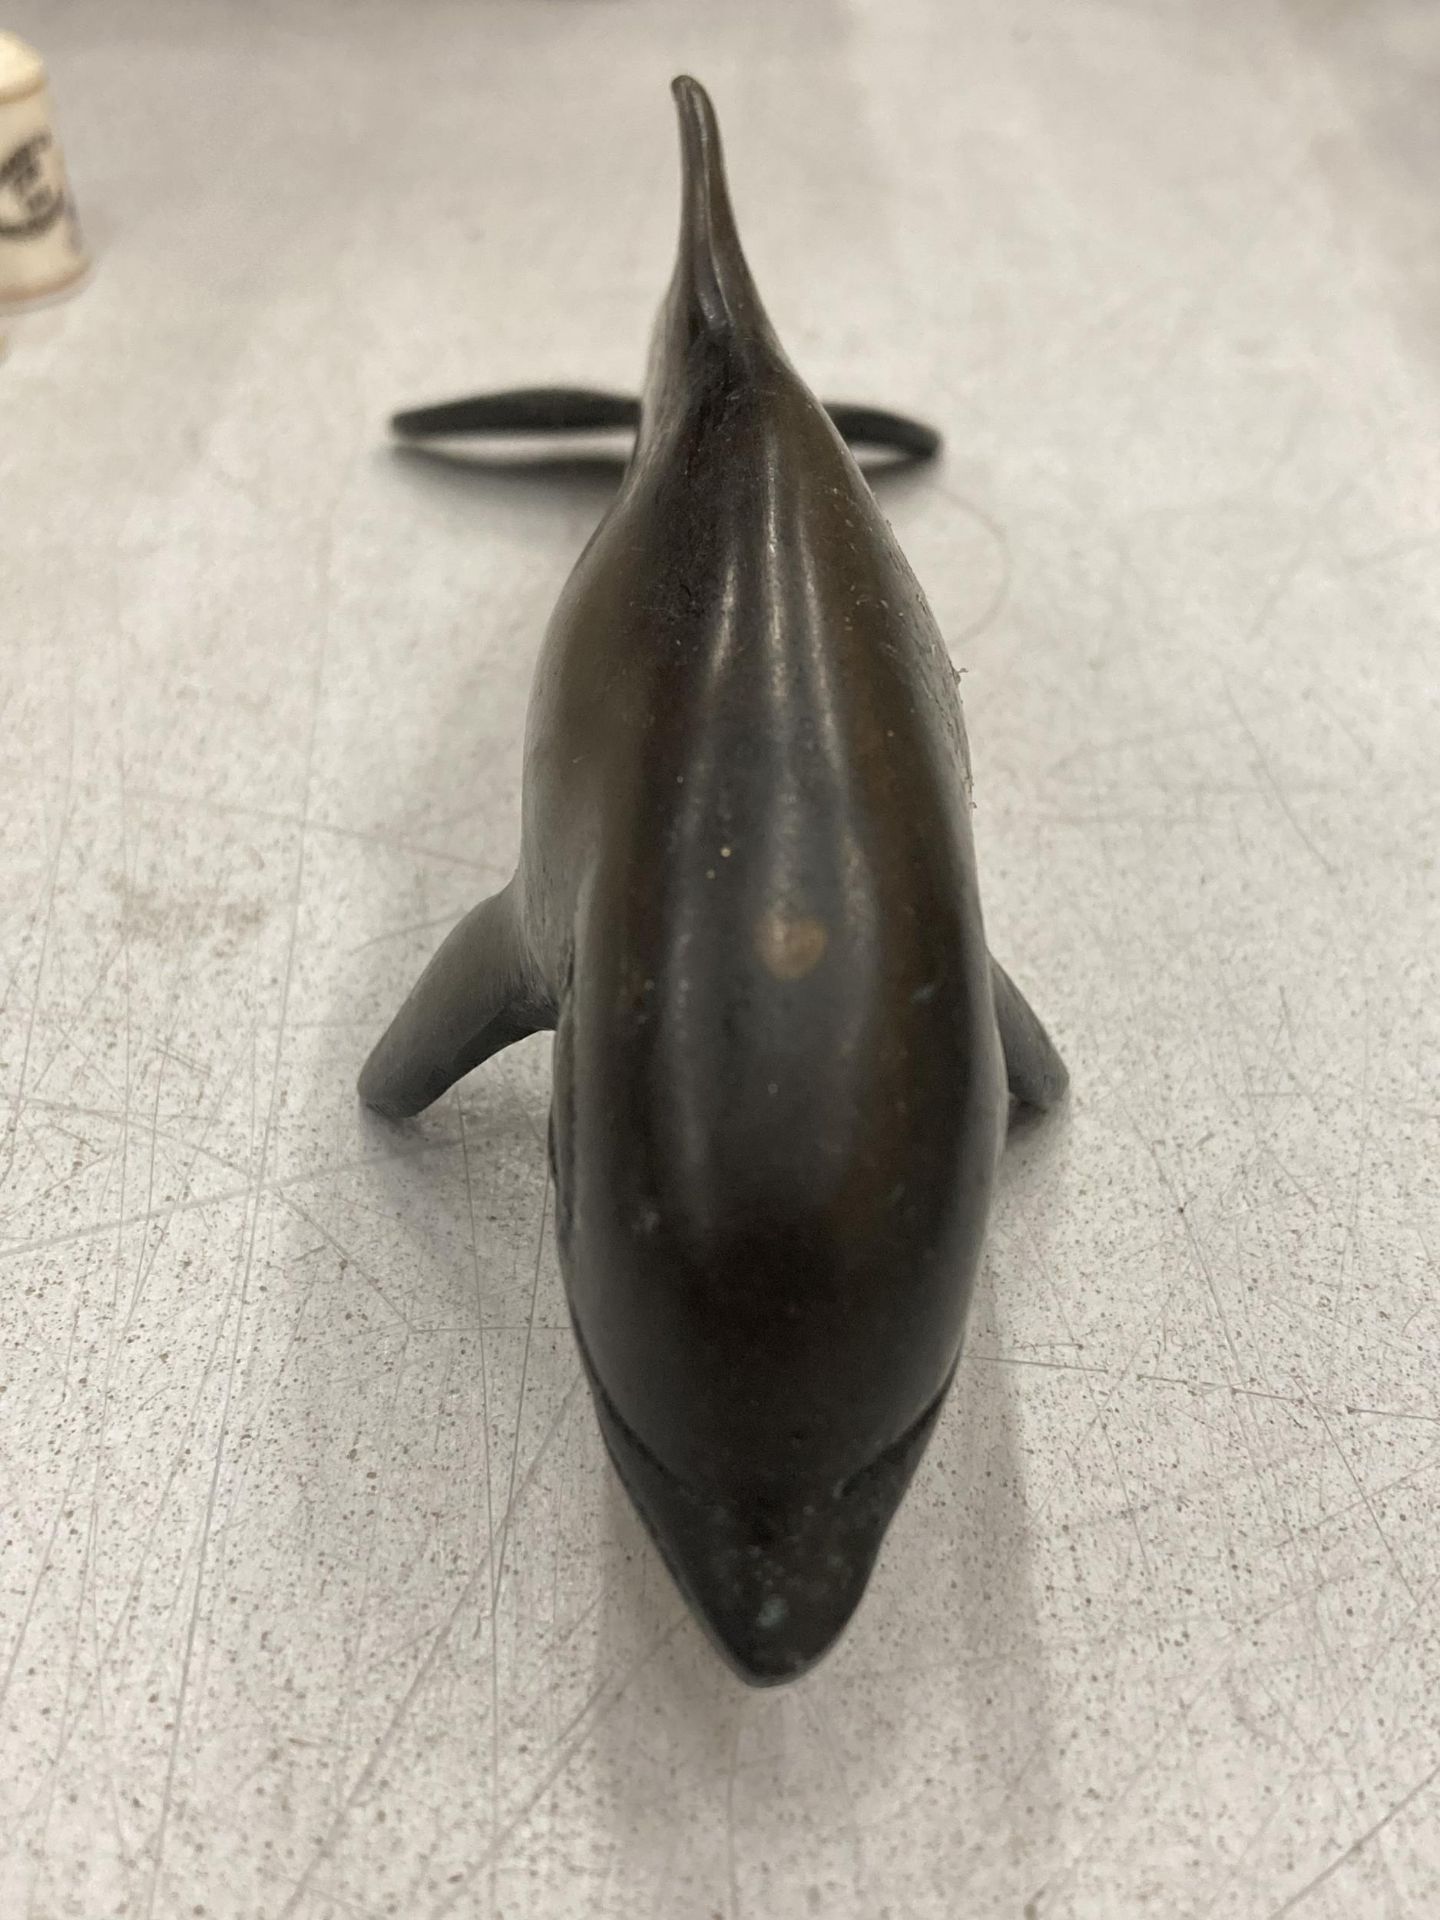 A SMALL BRONZE DOLPHIN FIGURE - Image 2 of 3